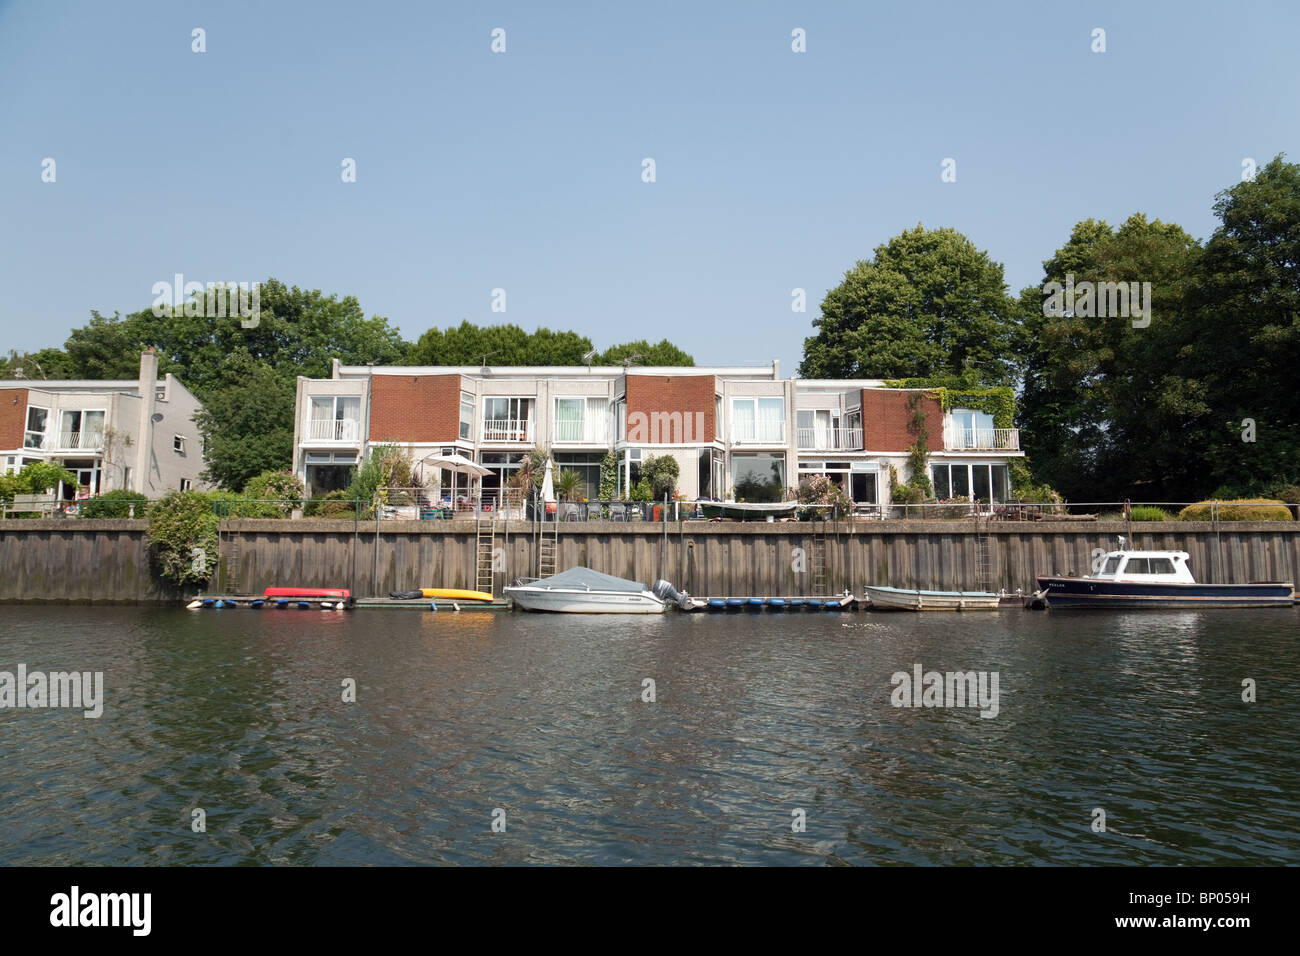 A house on the river Thames with boats moored, Eel Pie island, Twickenham, Richmond, London, UK Stock Photo